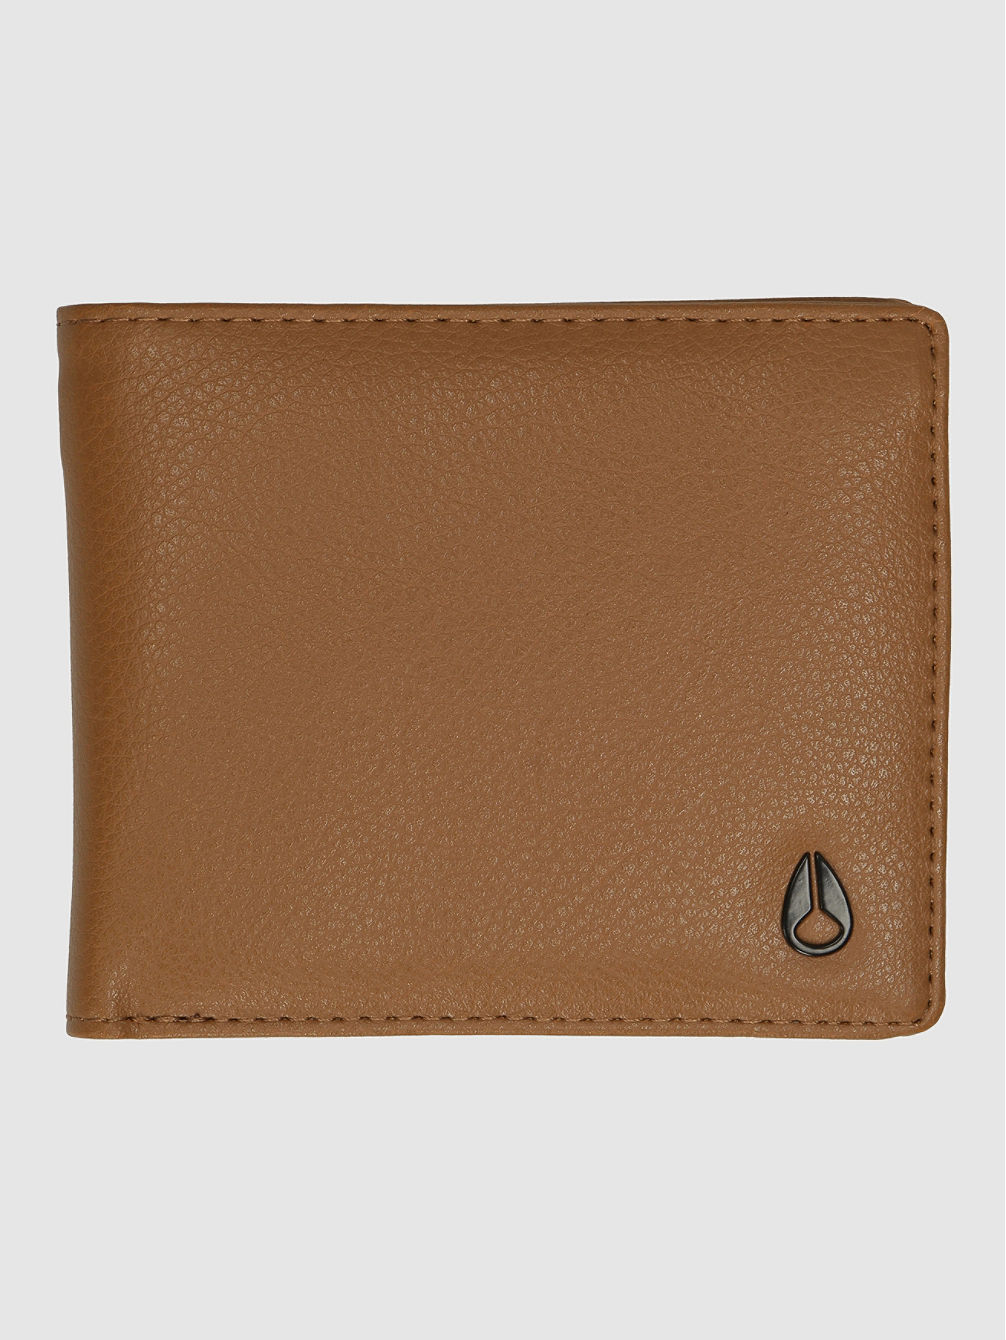 Pass Vegan Leather Coin Portefeuille